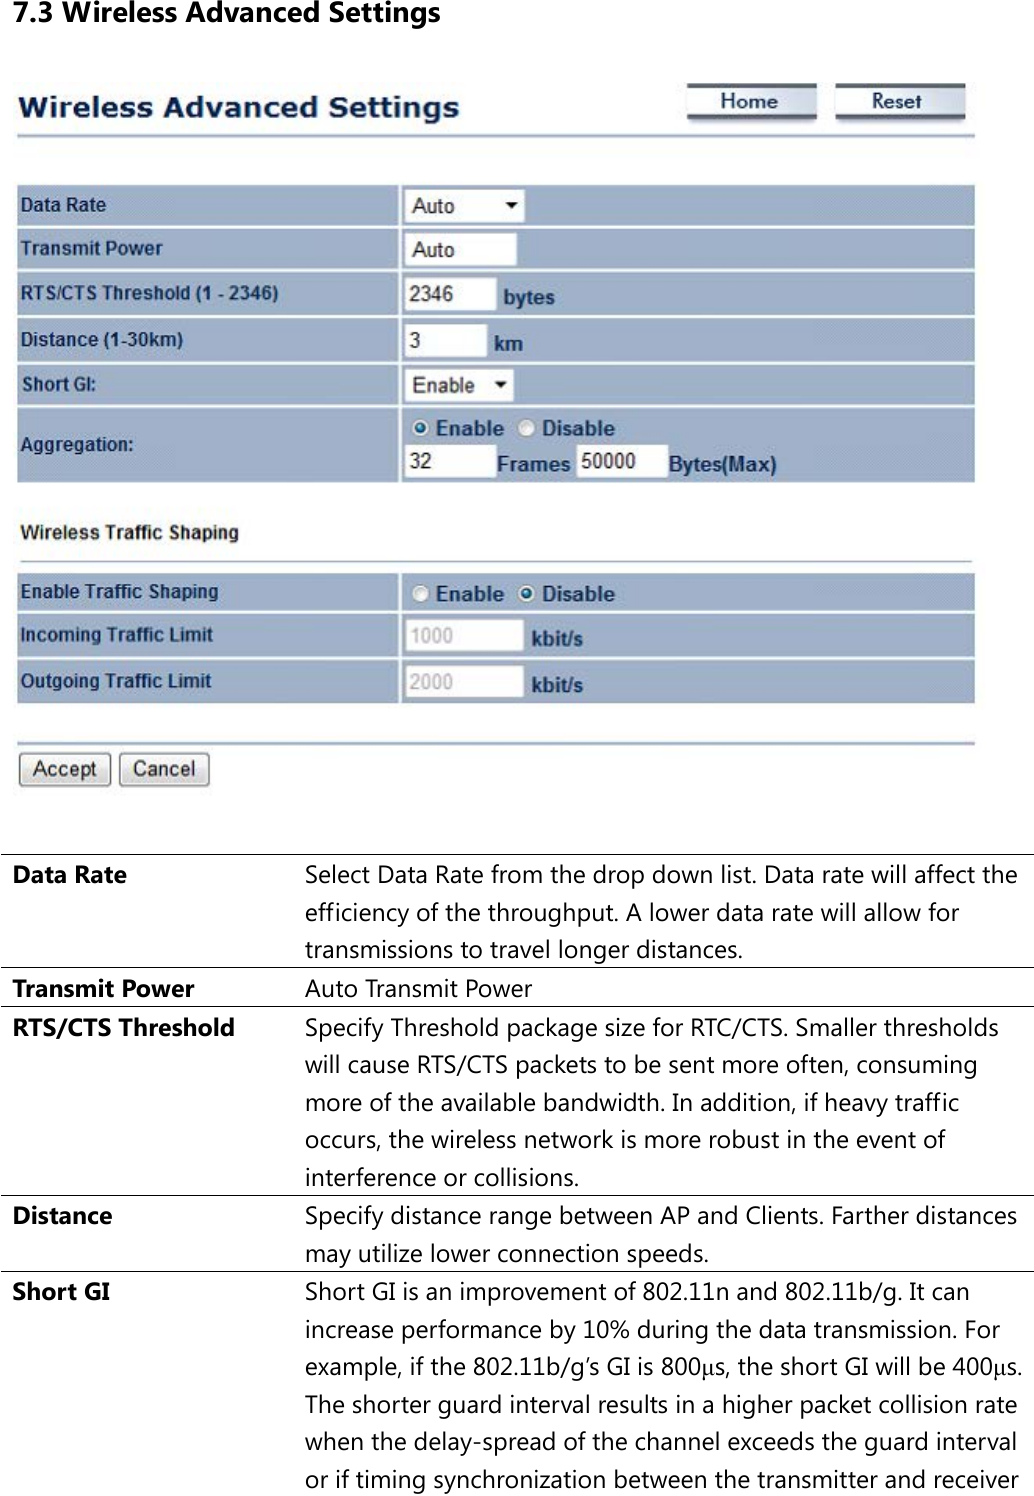 7.3 Wireless Advanced Settings   Data Rate Select Data Rate from the drop down list. Data rate will affect the efficiency of the throughput. A lower data rate will allow for transmissions to travel longer distances. Transmit Power Auto Transmit Power RTS/CTS Threshold Specify Threshold package size for RTC/CTS. Smaller thresholds will cause RTS/CTS packets to be sent more often, consuming more of the available bandwidth. In addition, if heavy traffic occurs, the wireless network is more robust in the event of interference or collisions. Distance Specify distance range between AP and Clients. Farther distances may utilize lower connection speeds. Short GI Short GI is an improvement of 802.11n and 802.11b/g. It can increase performance by 10% during the data transmission. For example, if the 802.11b/g’s GI is 800μs, the short GI will be 400μs.  The shorter guard interval results in a higher packet collision rate when the delay-spread of the channel exceeds the guard interval or if timing synchronization between the transmitter and receiver 